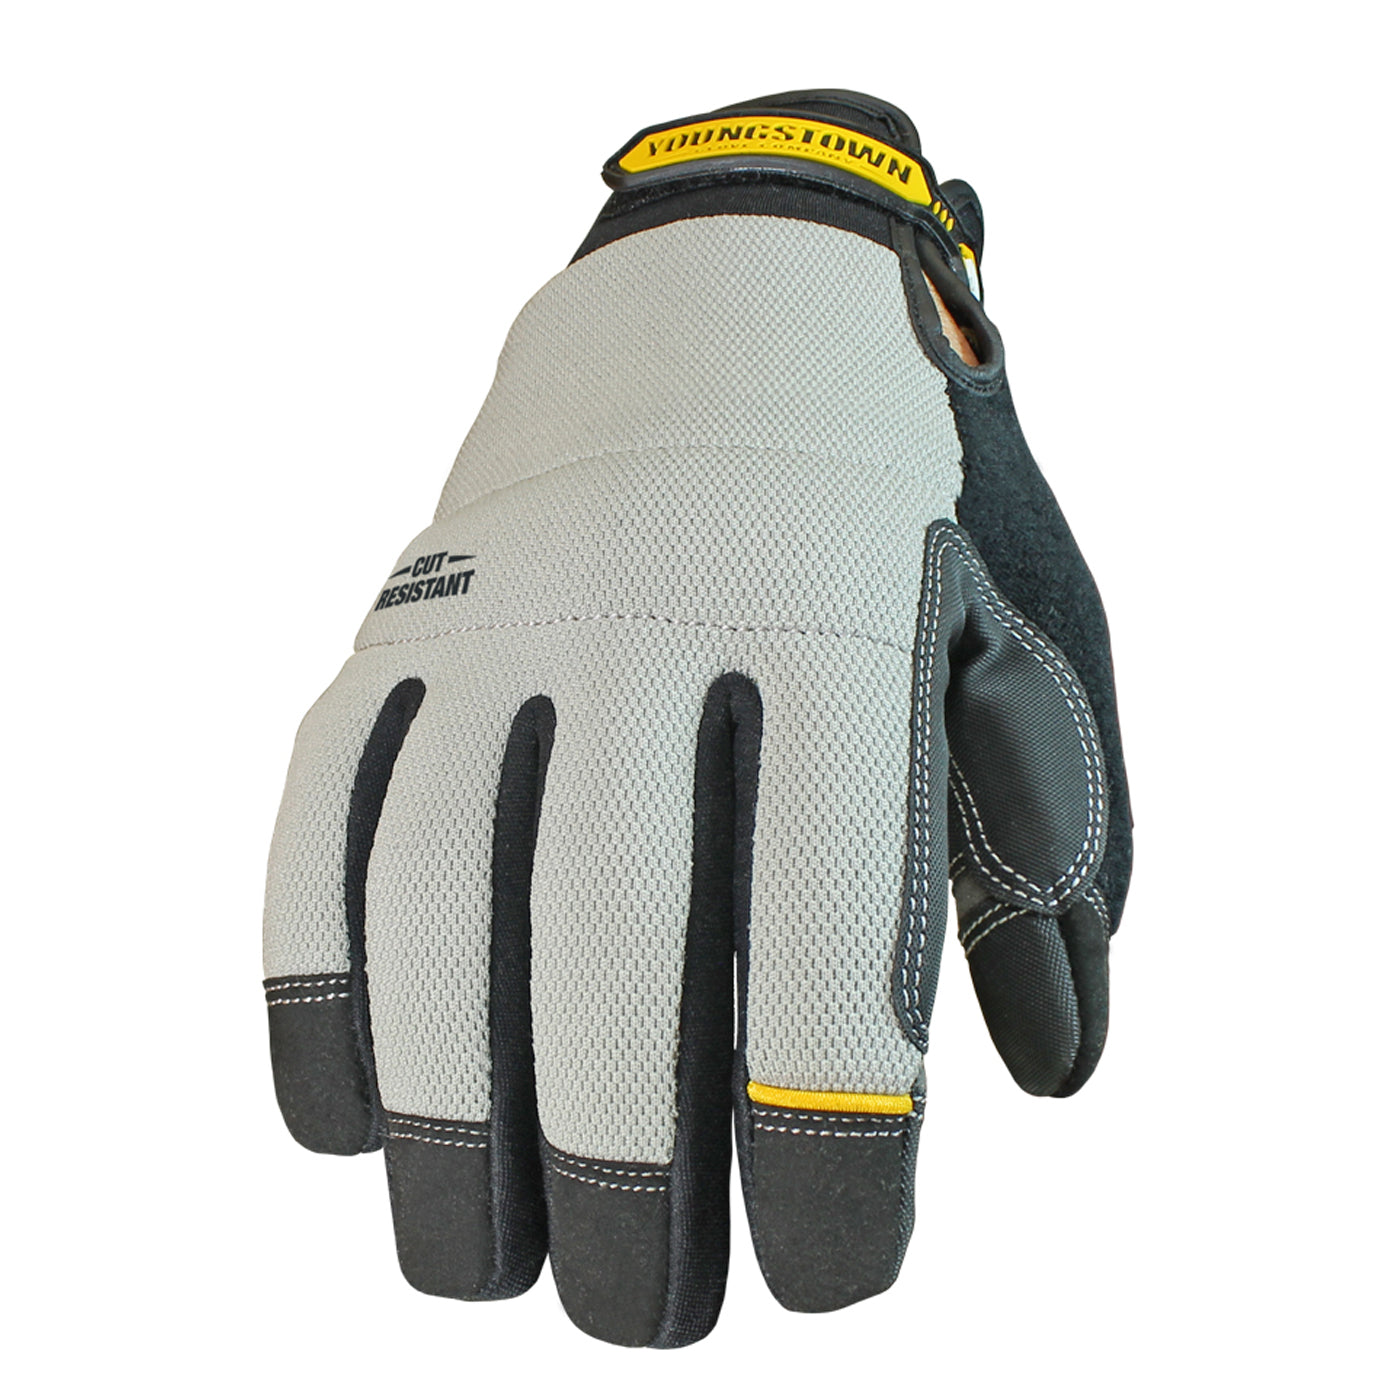 Youngstown General Utility Gloves Lined with Kevlar Large